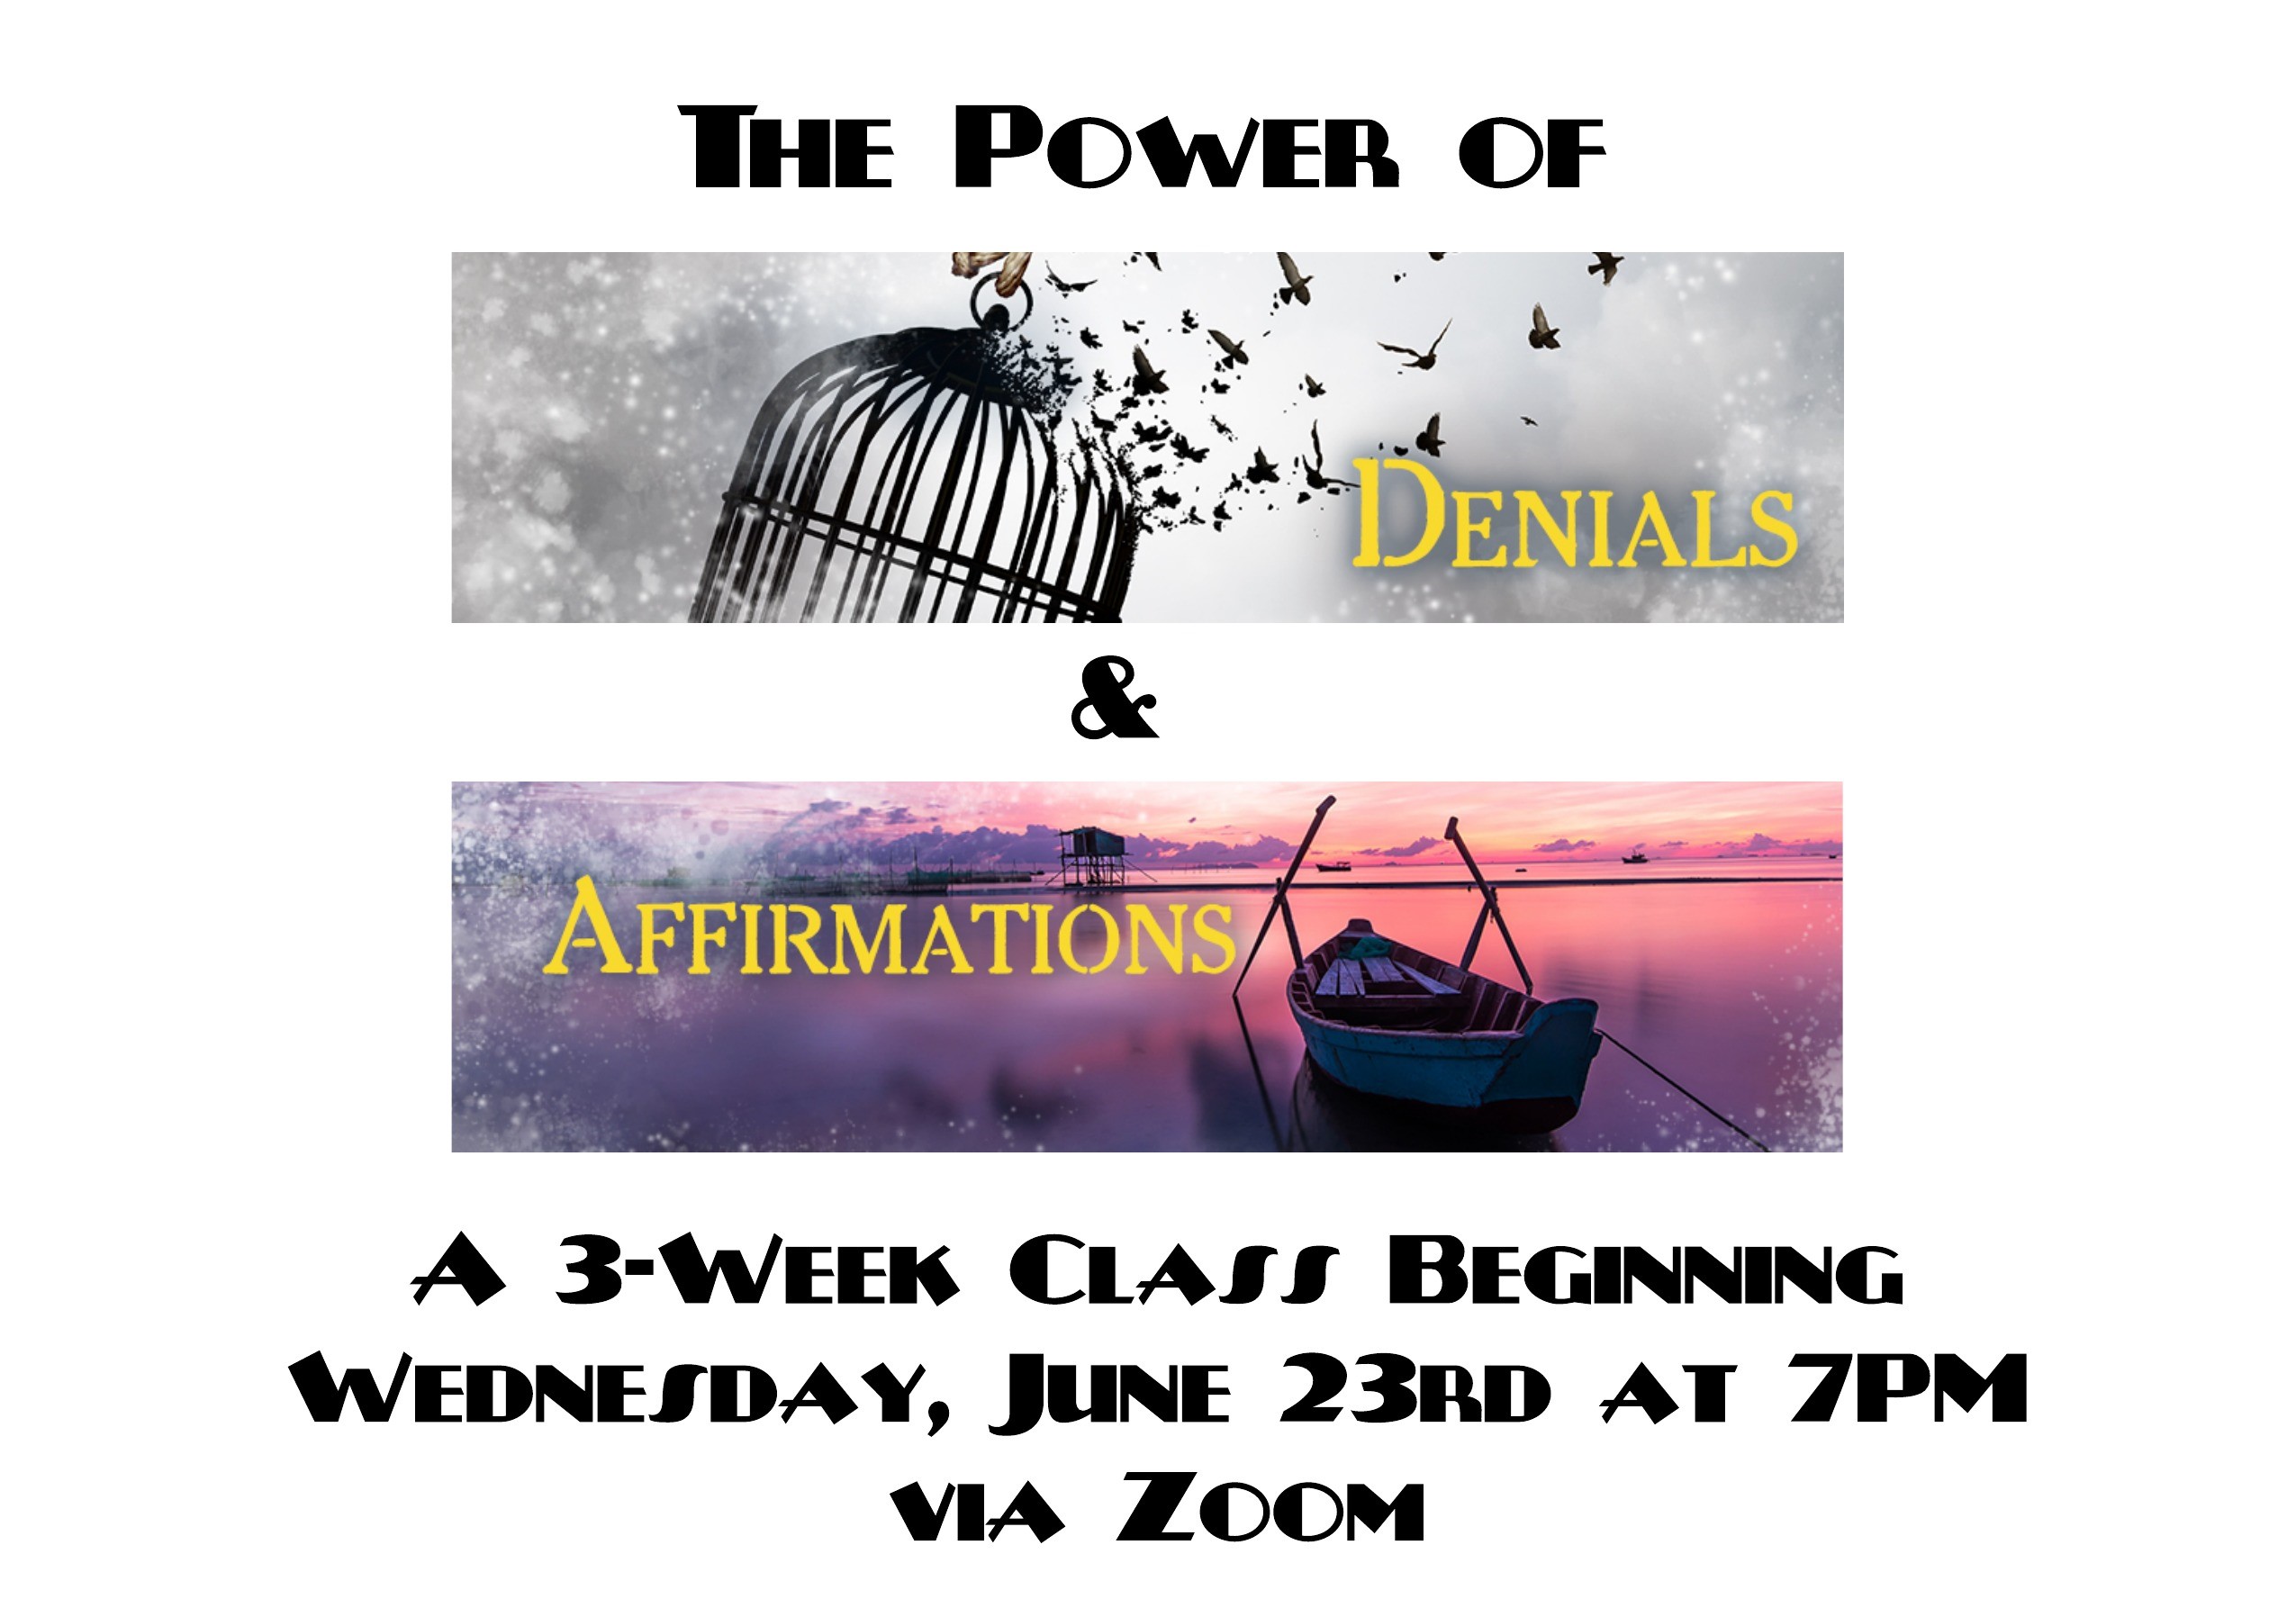 Denials & Affirmations CiviCRM Pic Hold